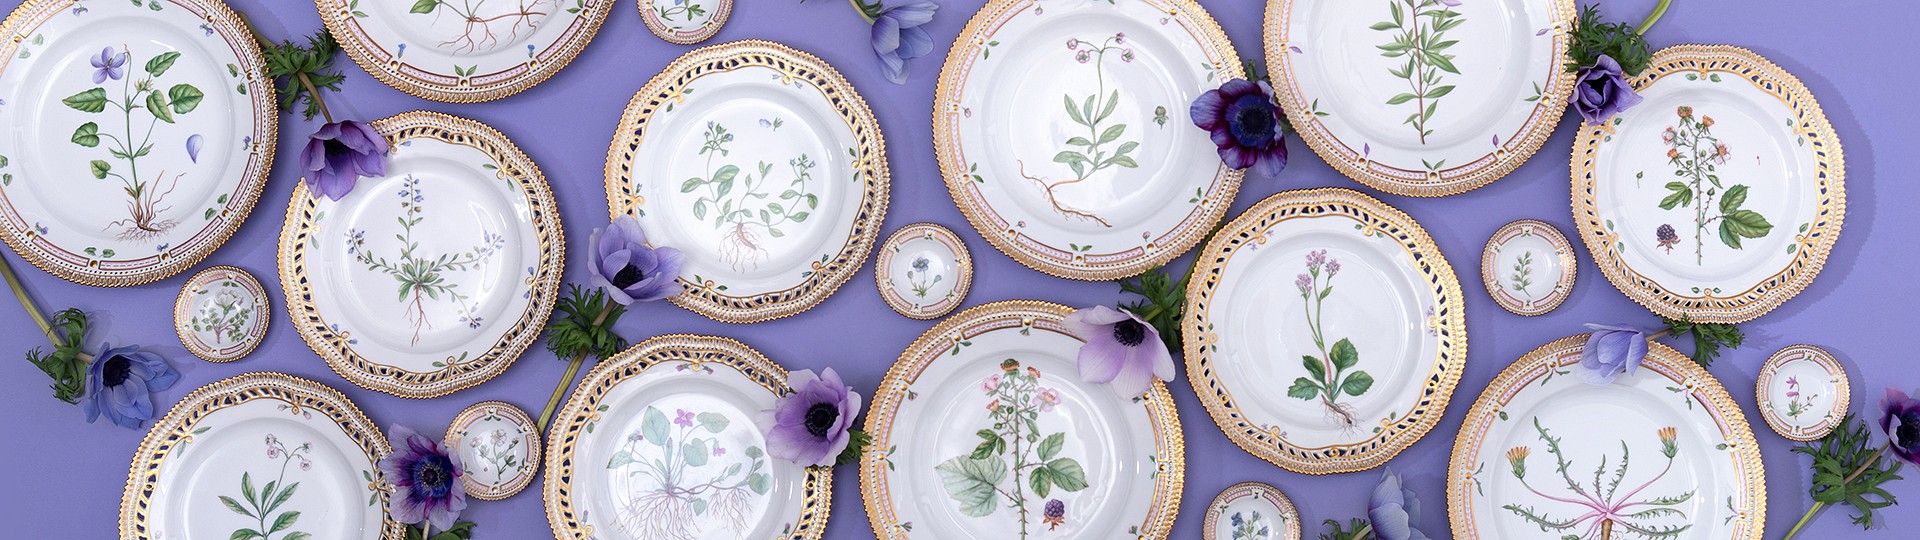 The Porcelain Sale by STAIR